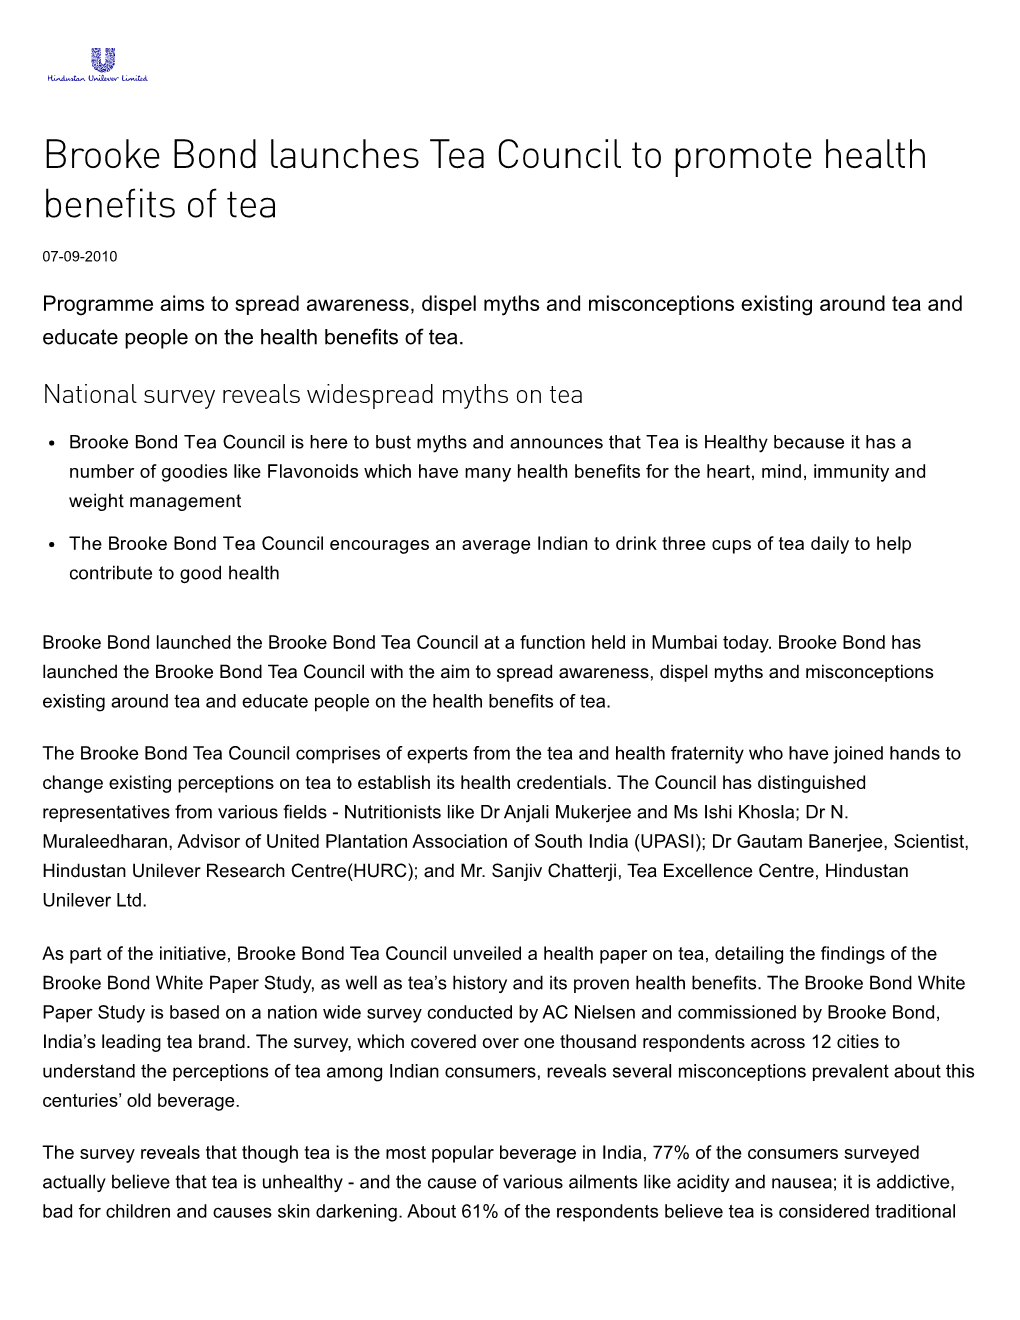 Brooke Bond Launches Tea Council to Promote Health Benefits Of